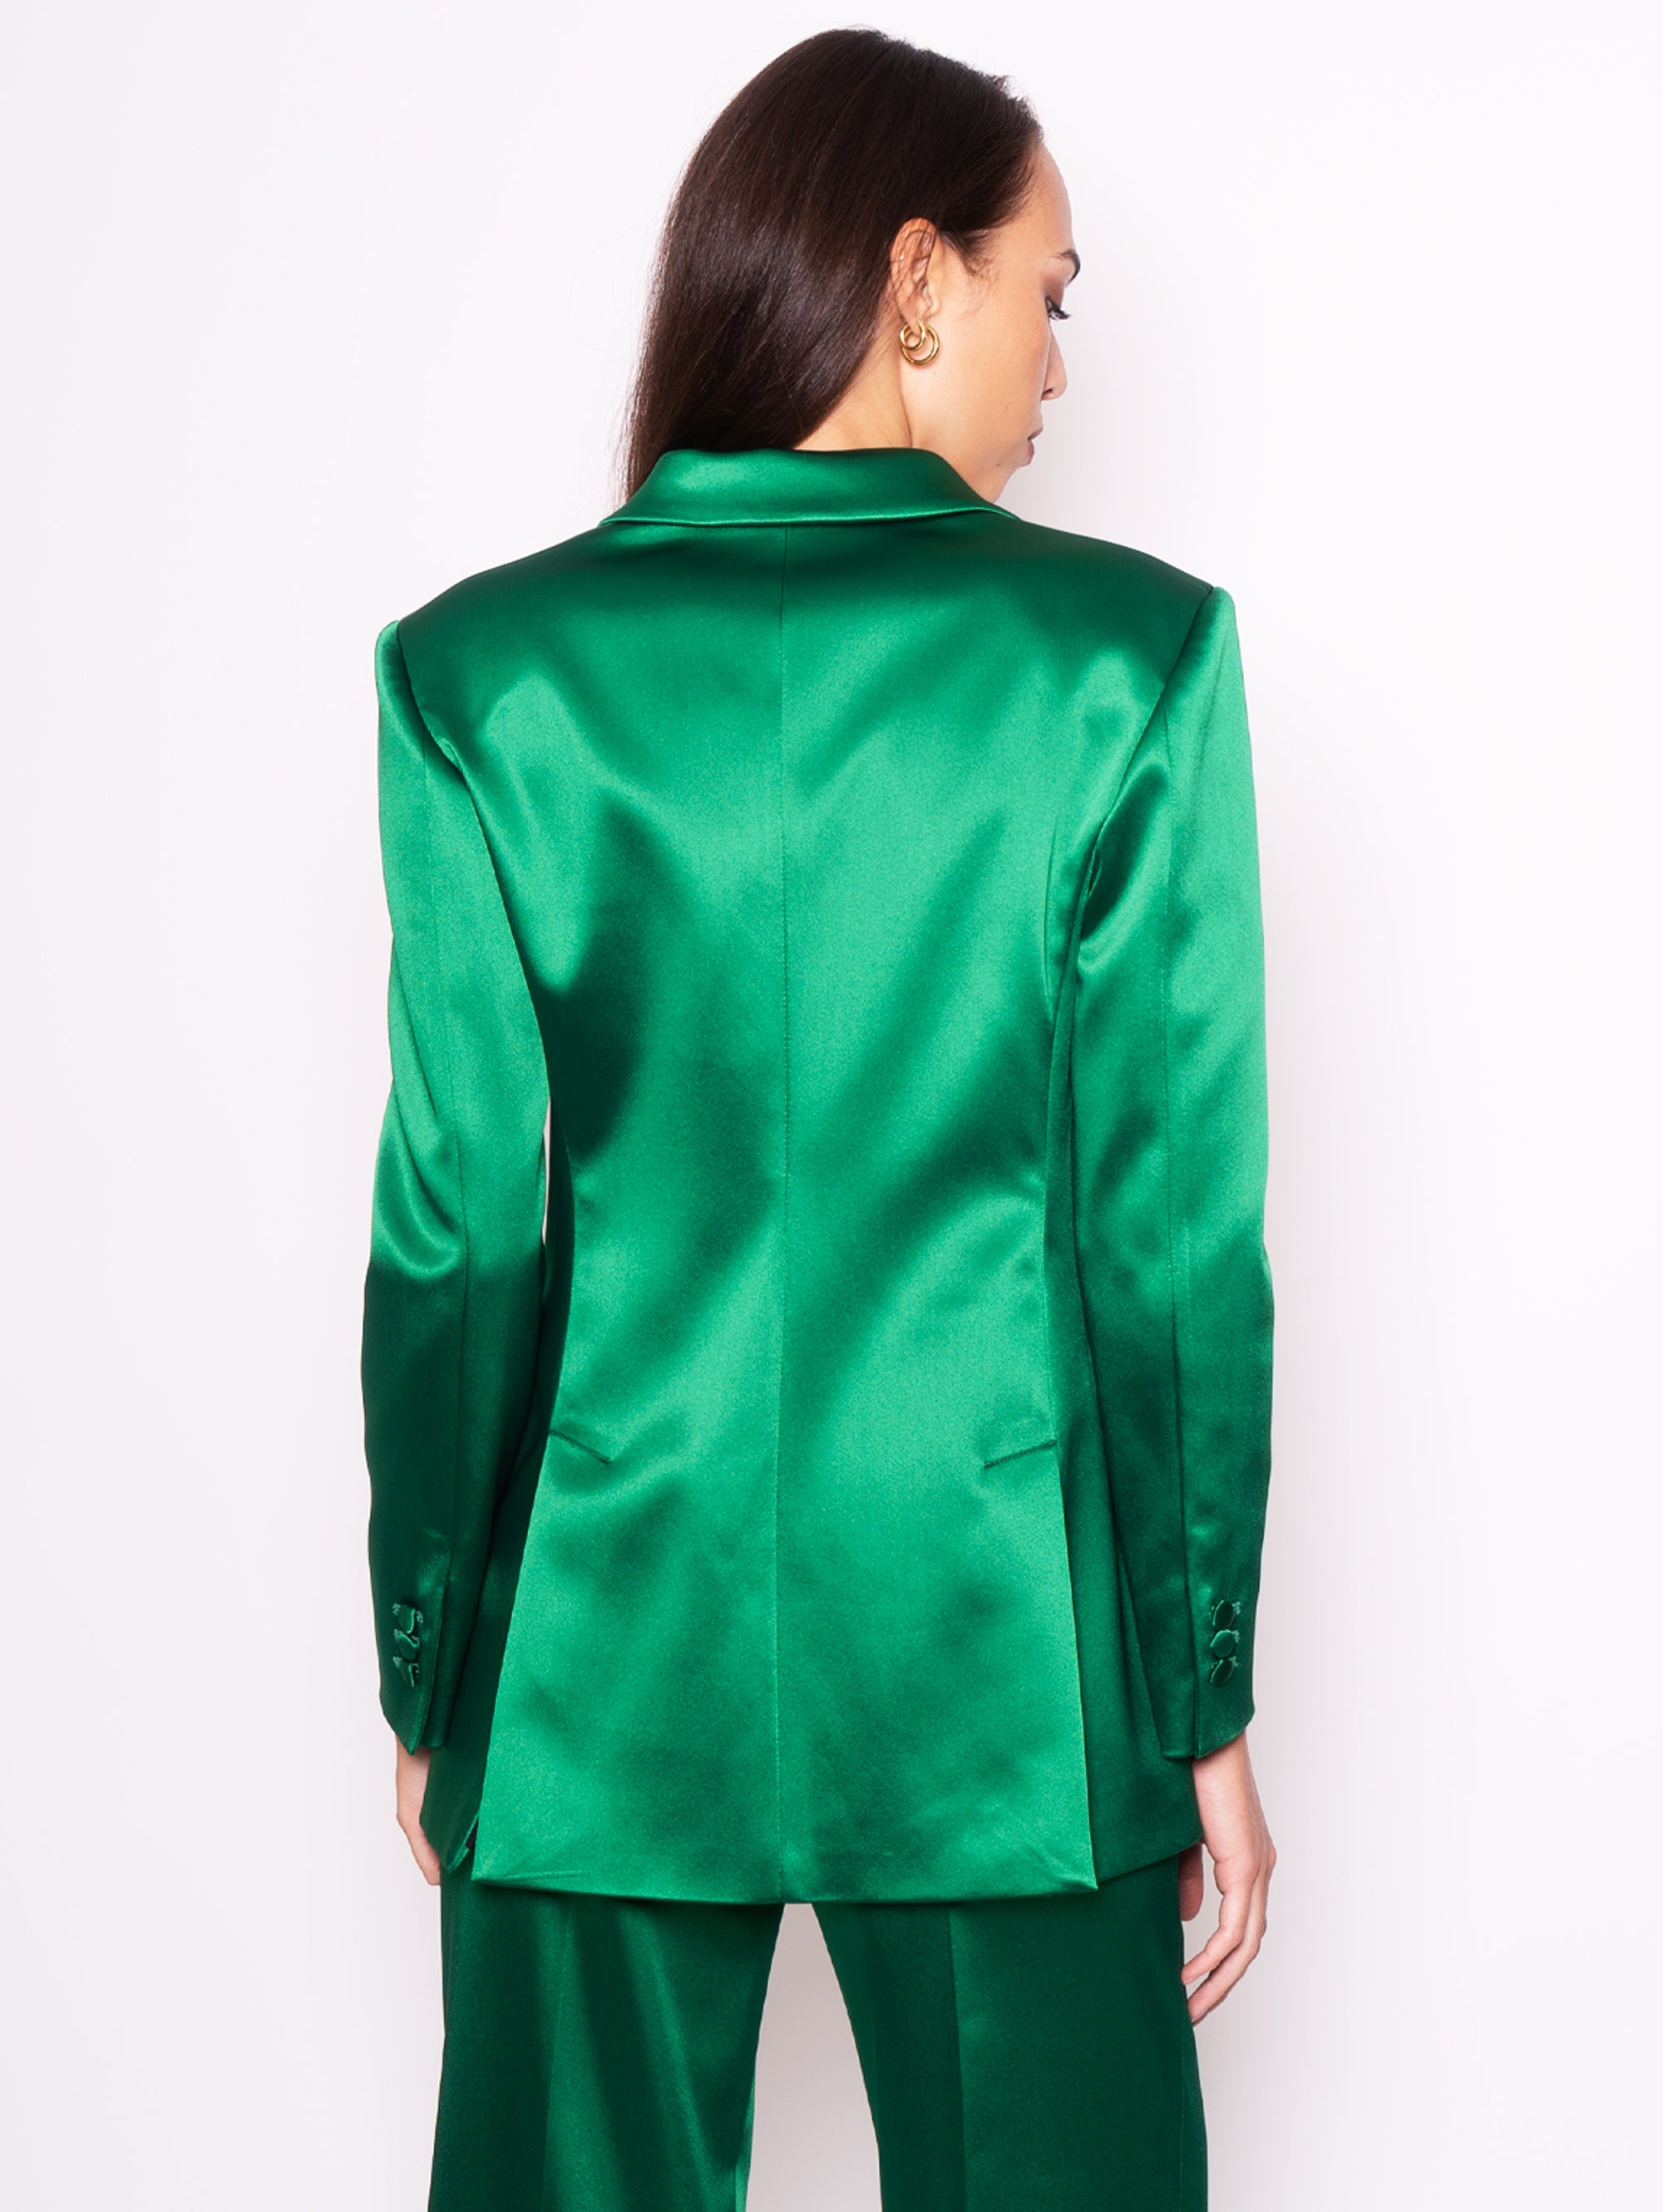 Double Breasted Jacket in Green Satin